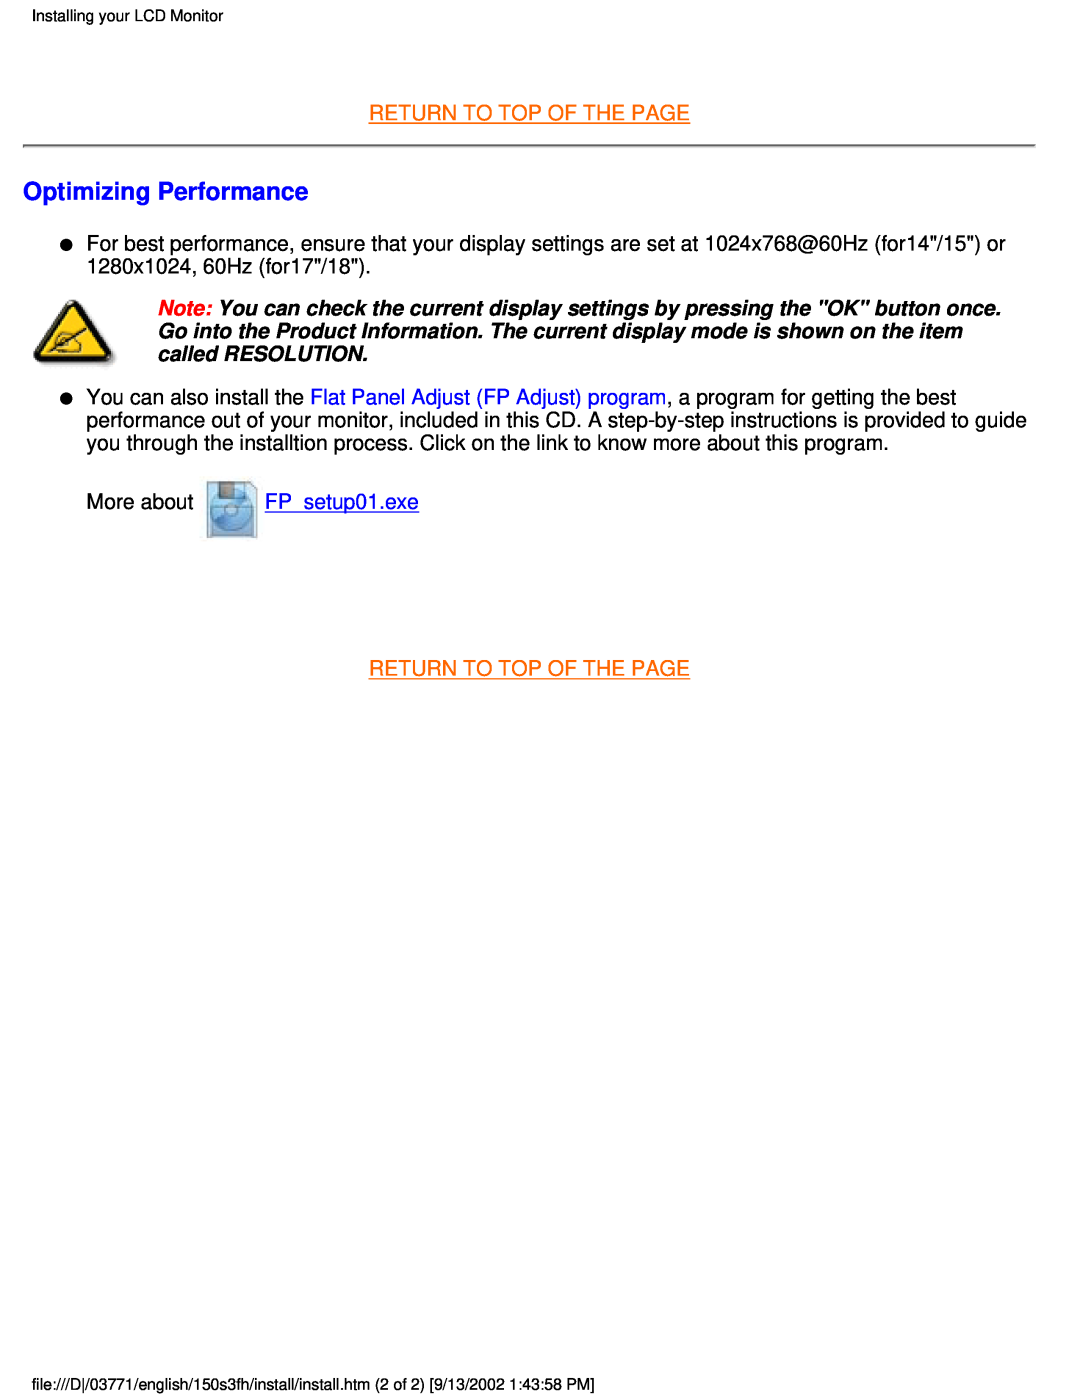 Philips 150S3H user manual Optimizing Performance, Return To Top Of The Page, More about FPsetup01.exe 